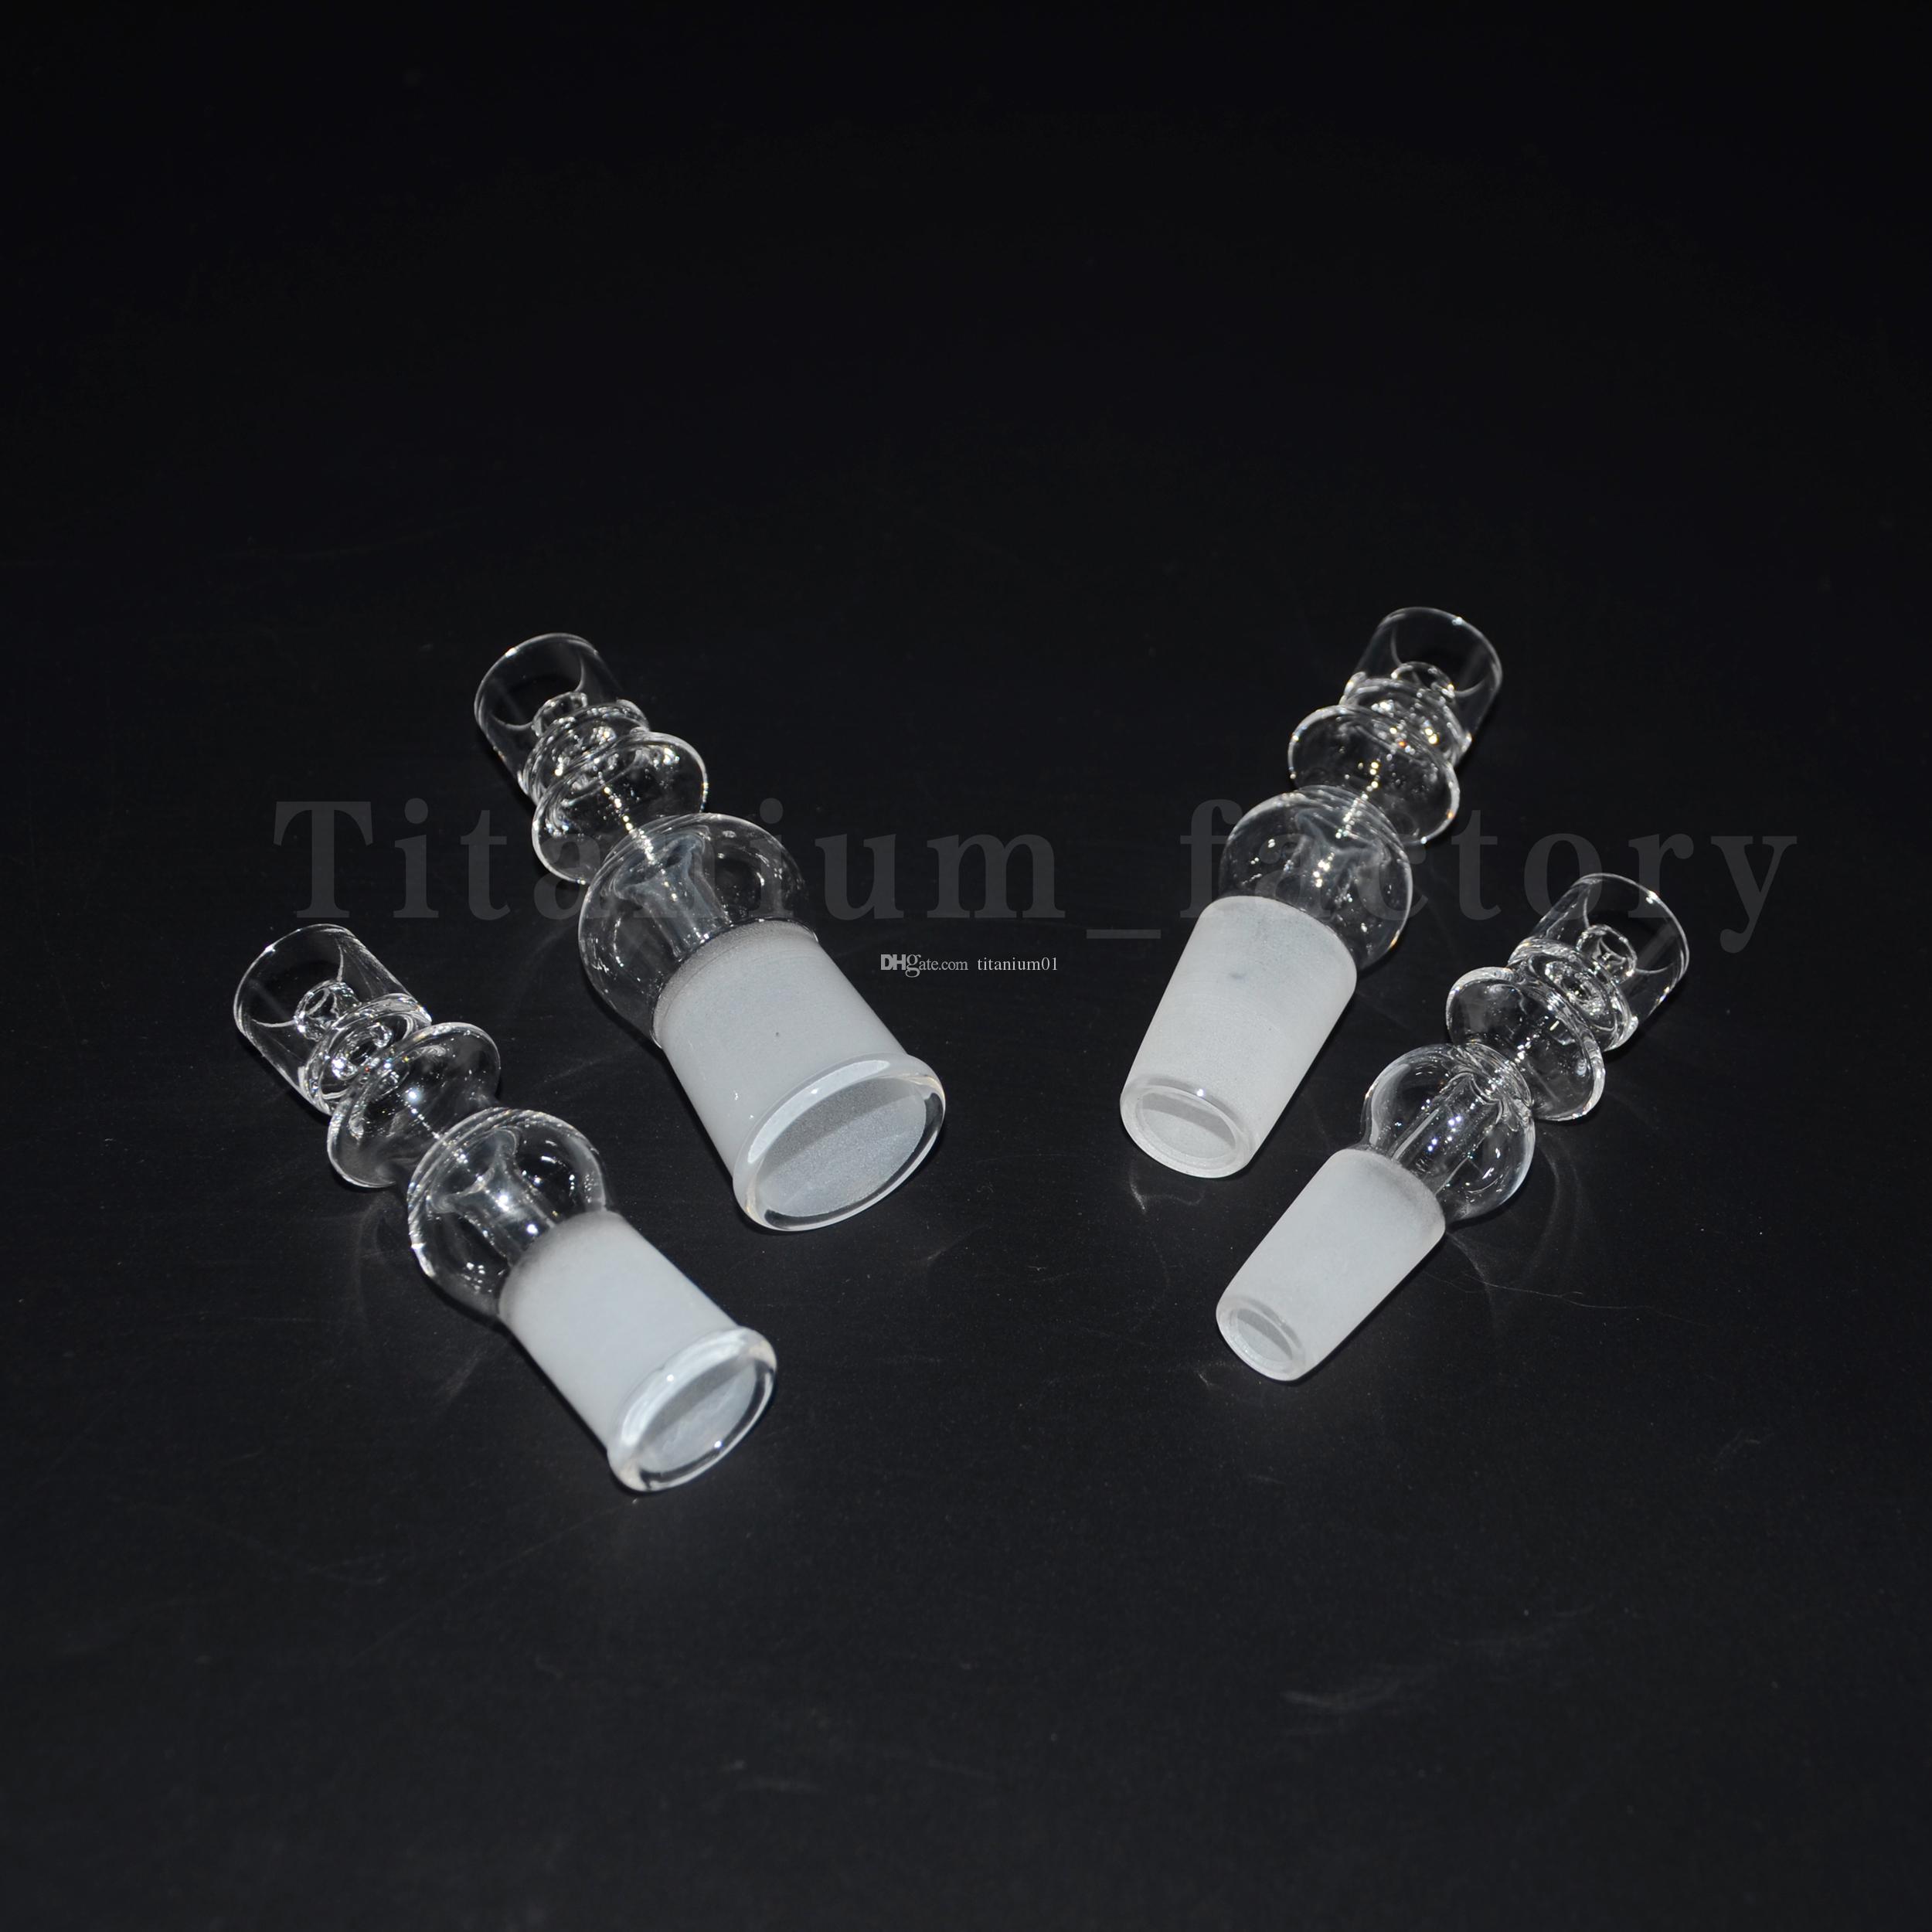 Quartz nail from Top Star Fit 16mm heating coil Quartz Electric Nail in stock